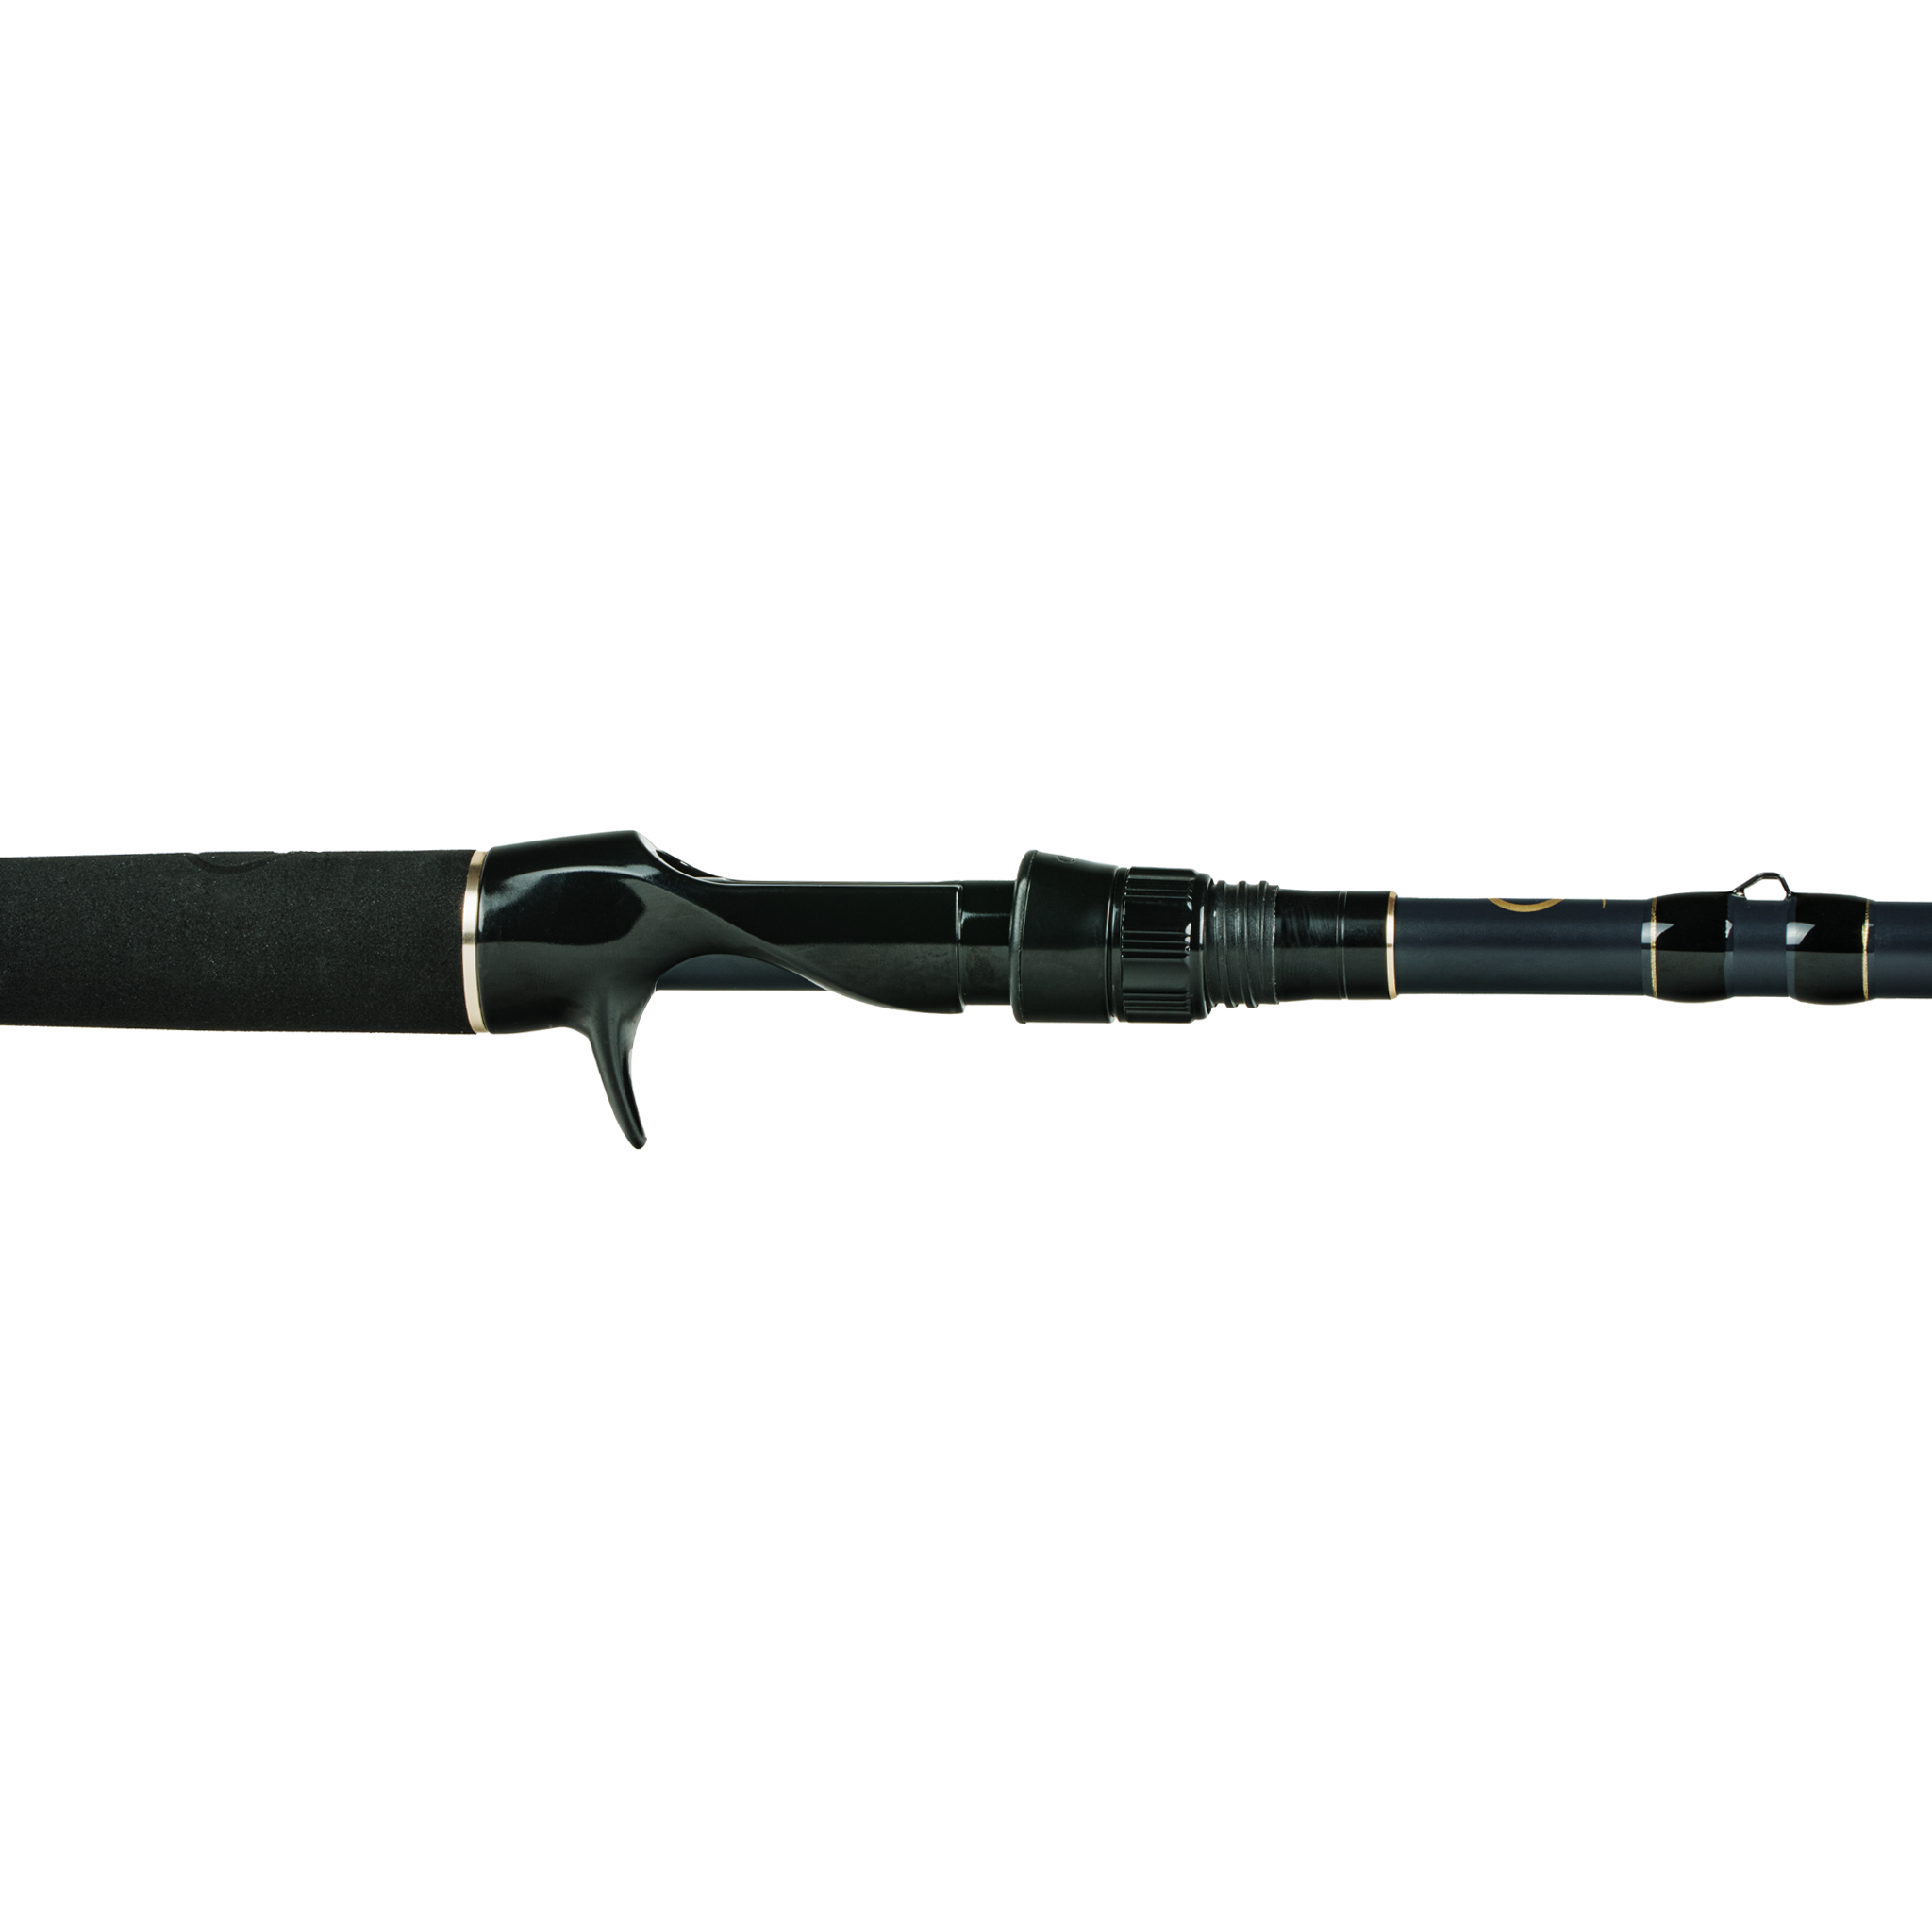 6th Sense Fishing - Rods - The Broomstick 7'10 Extra-Heavy, Mod-Fast